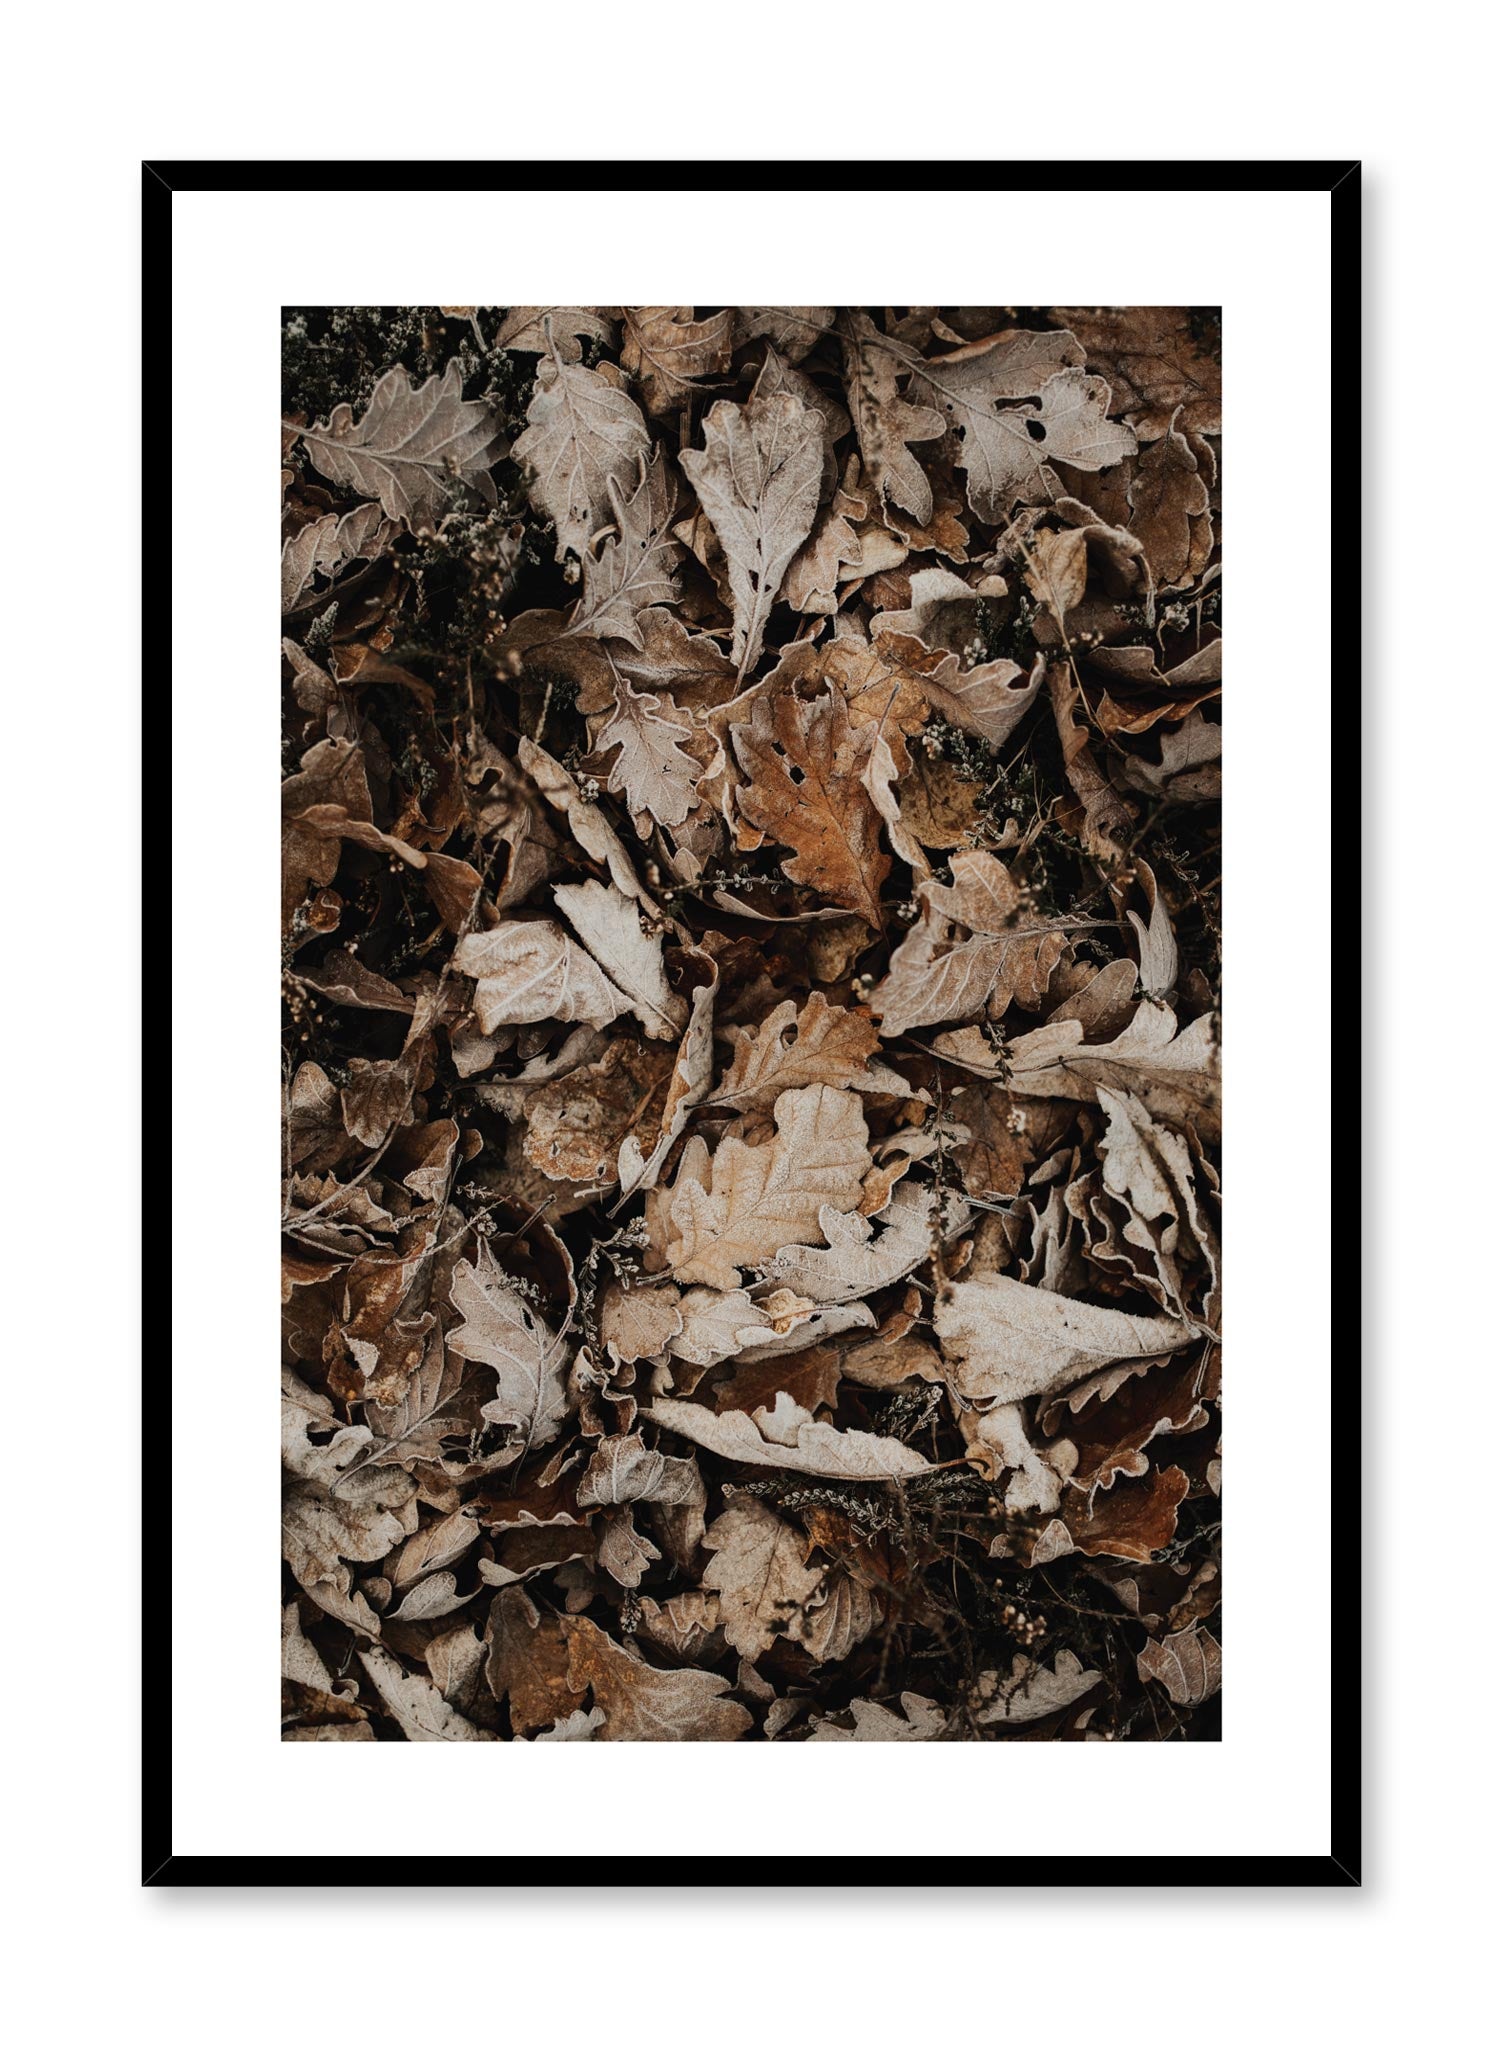 Minimalist design poster by Opposite Wall with Autumn Leaves photography